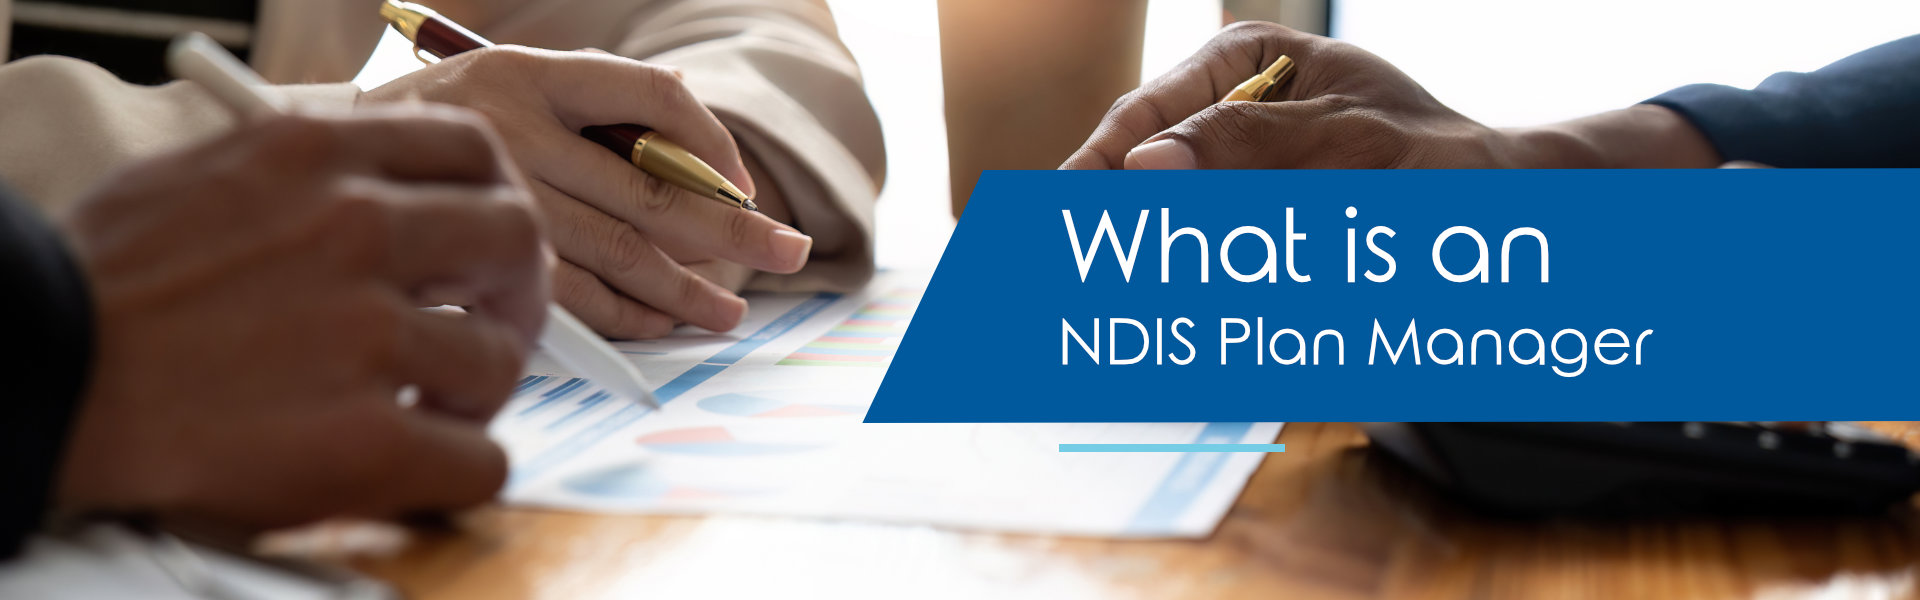 Banner with text saying What is an NDIS Plan Manager?